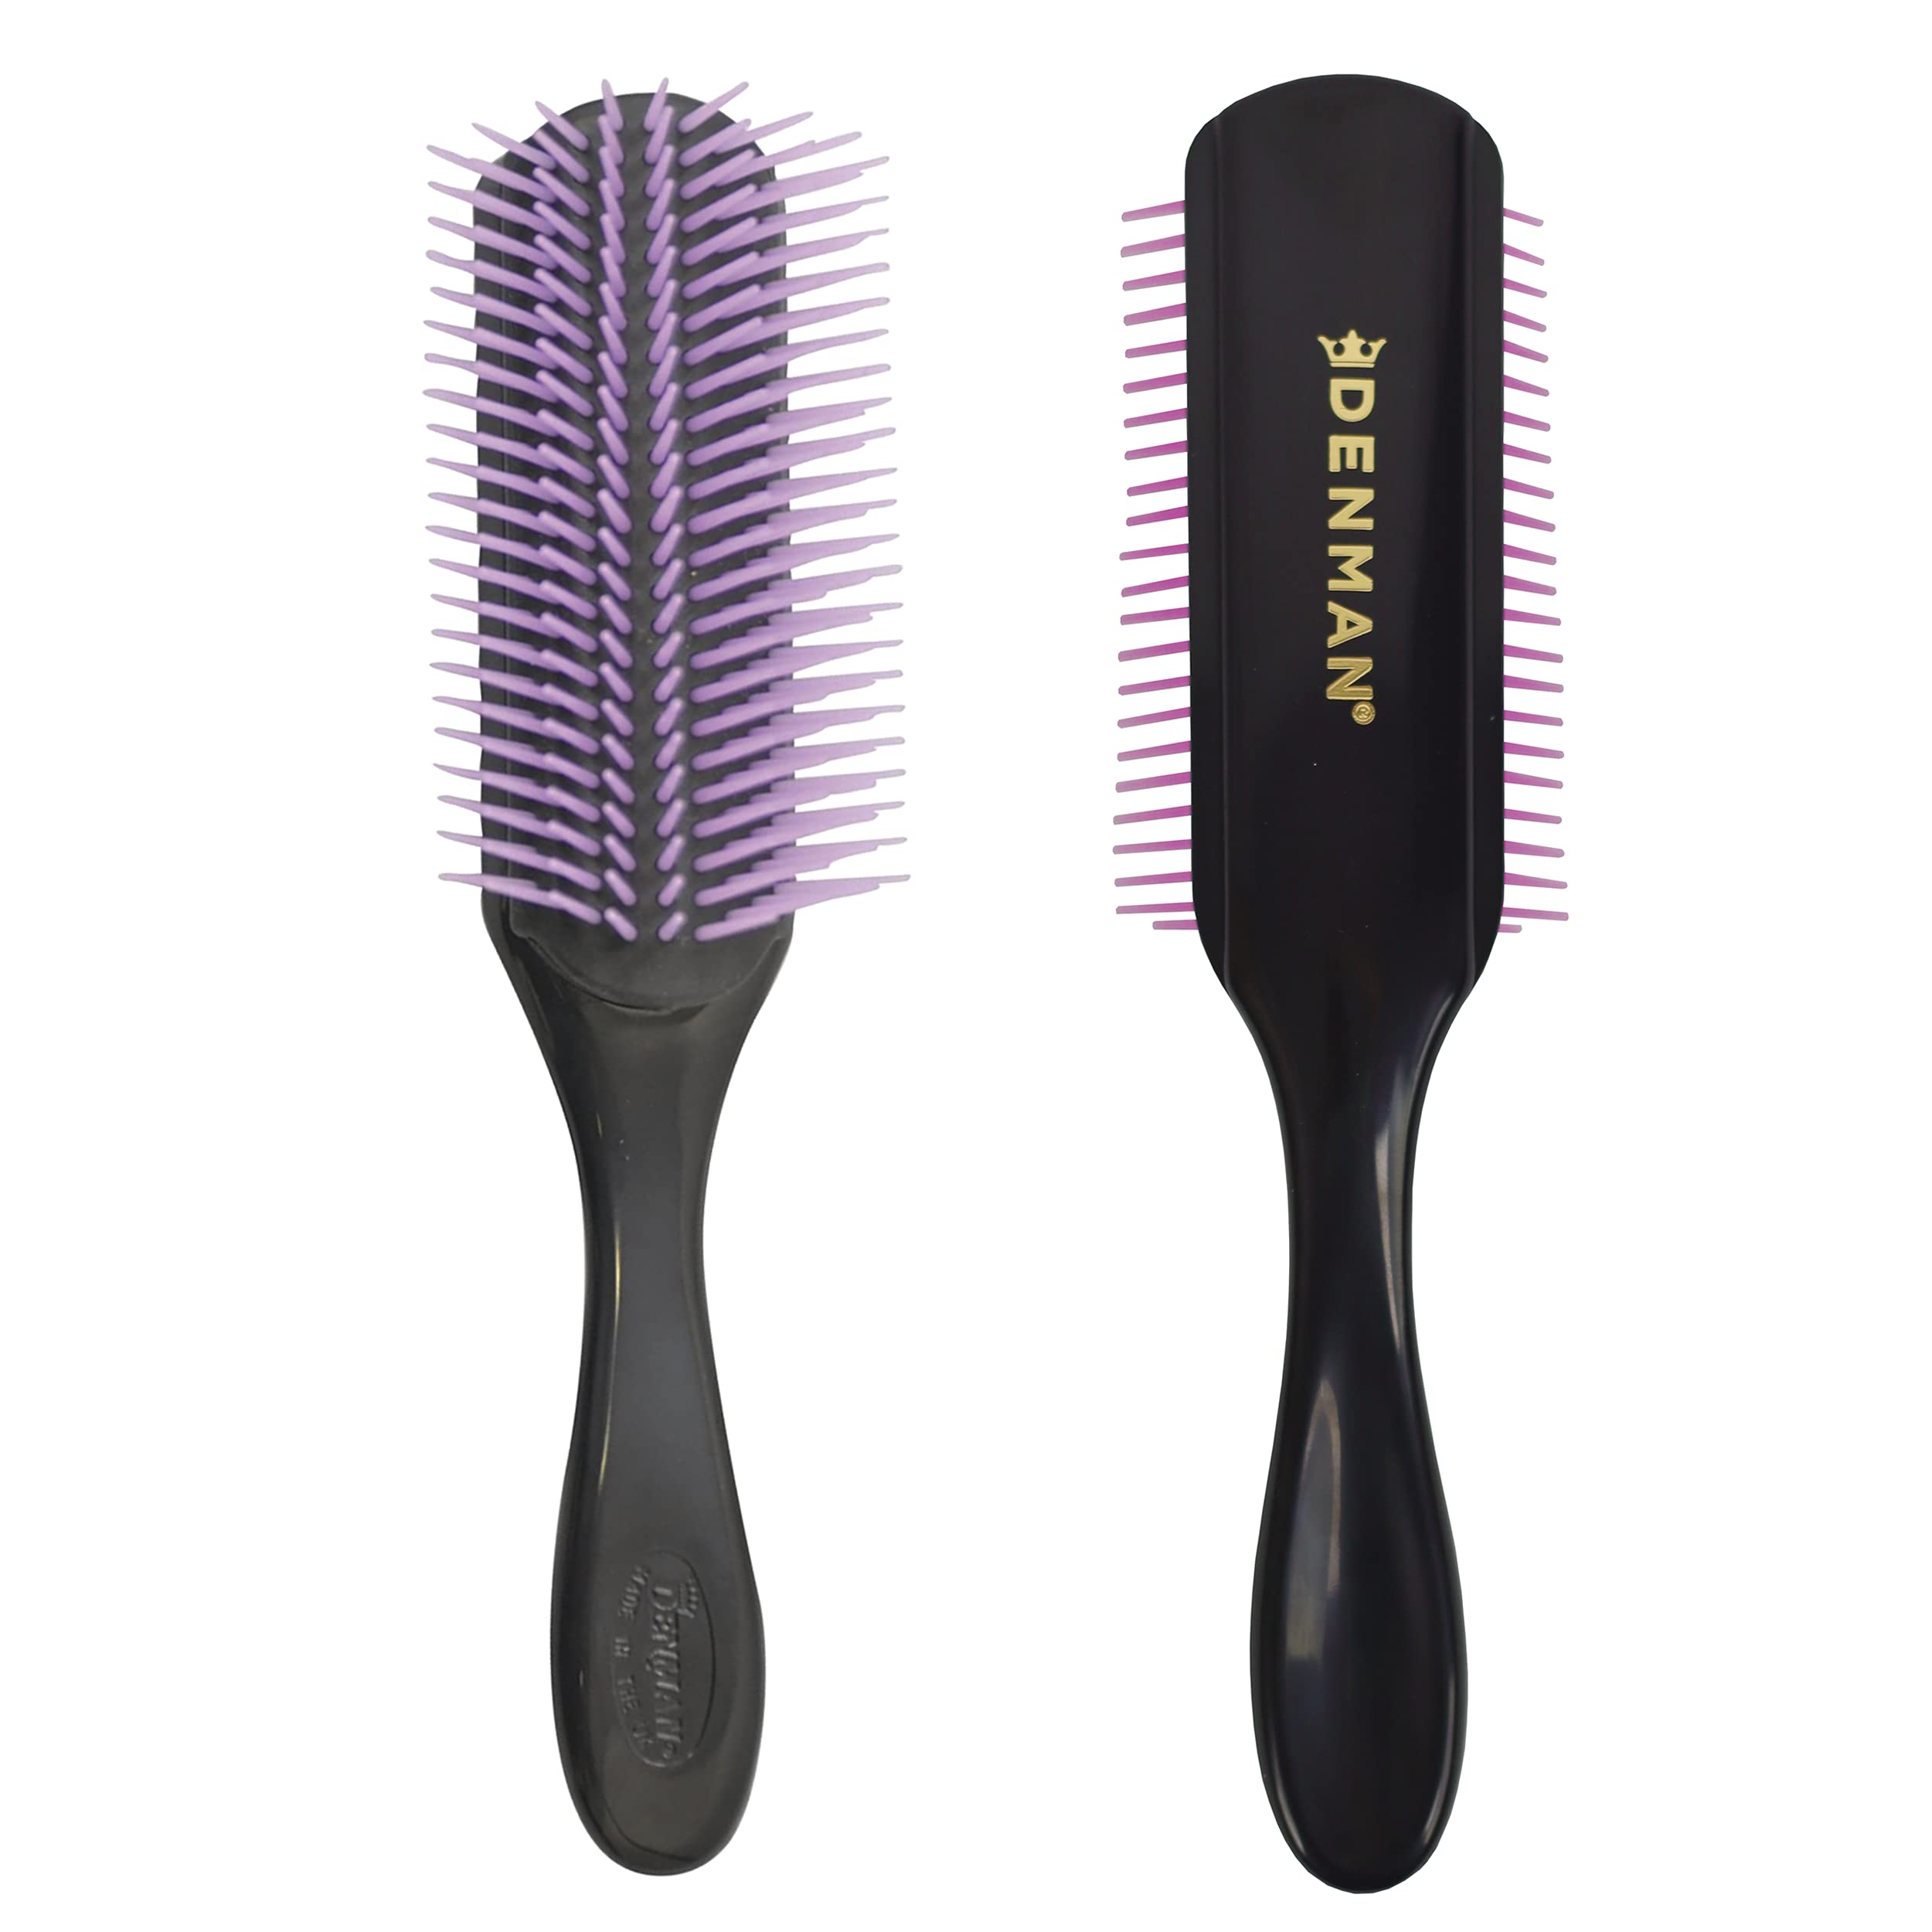 Denman Curly Hair Brush D4 (Black/Purple) 9 Row Styling Brush for Styling, Smoothing Longer Hair and Defining Curls - For Women and Men